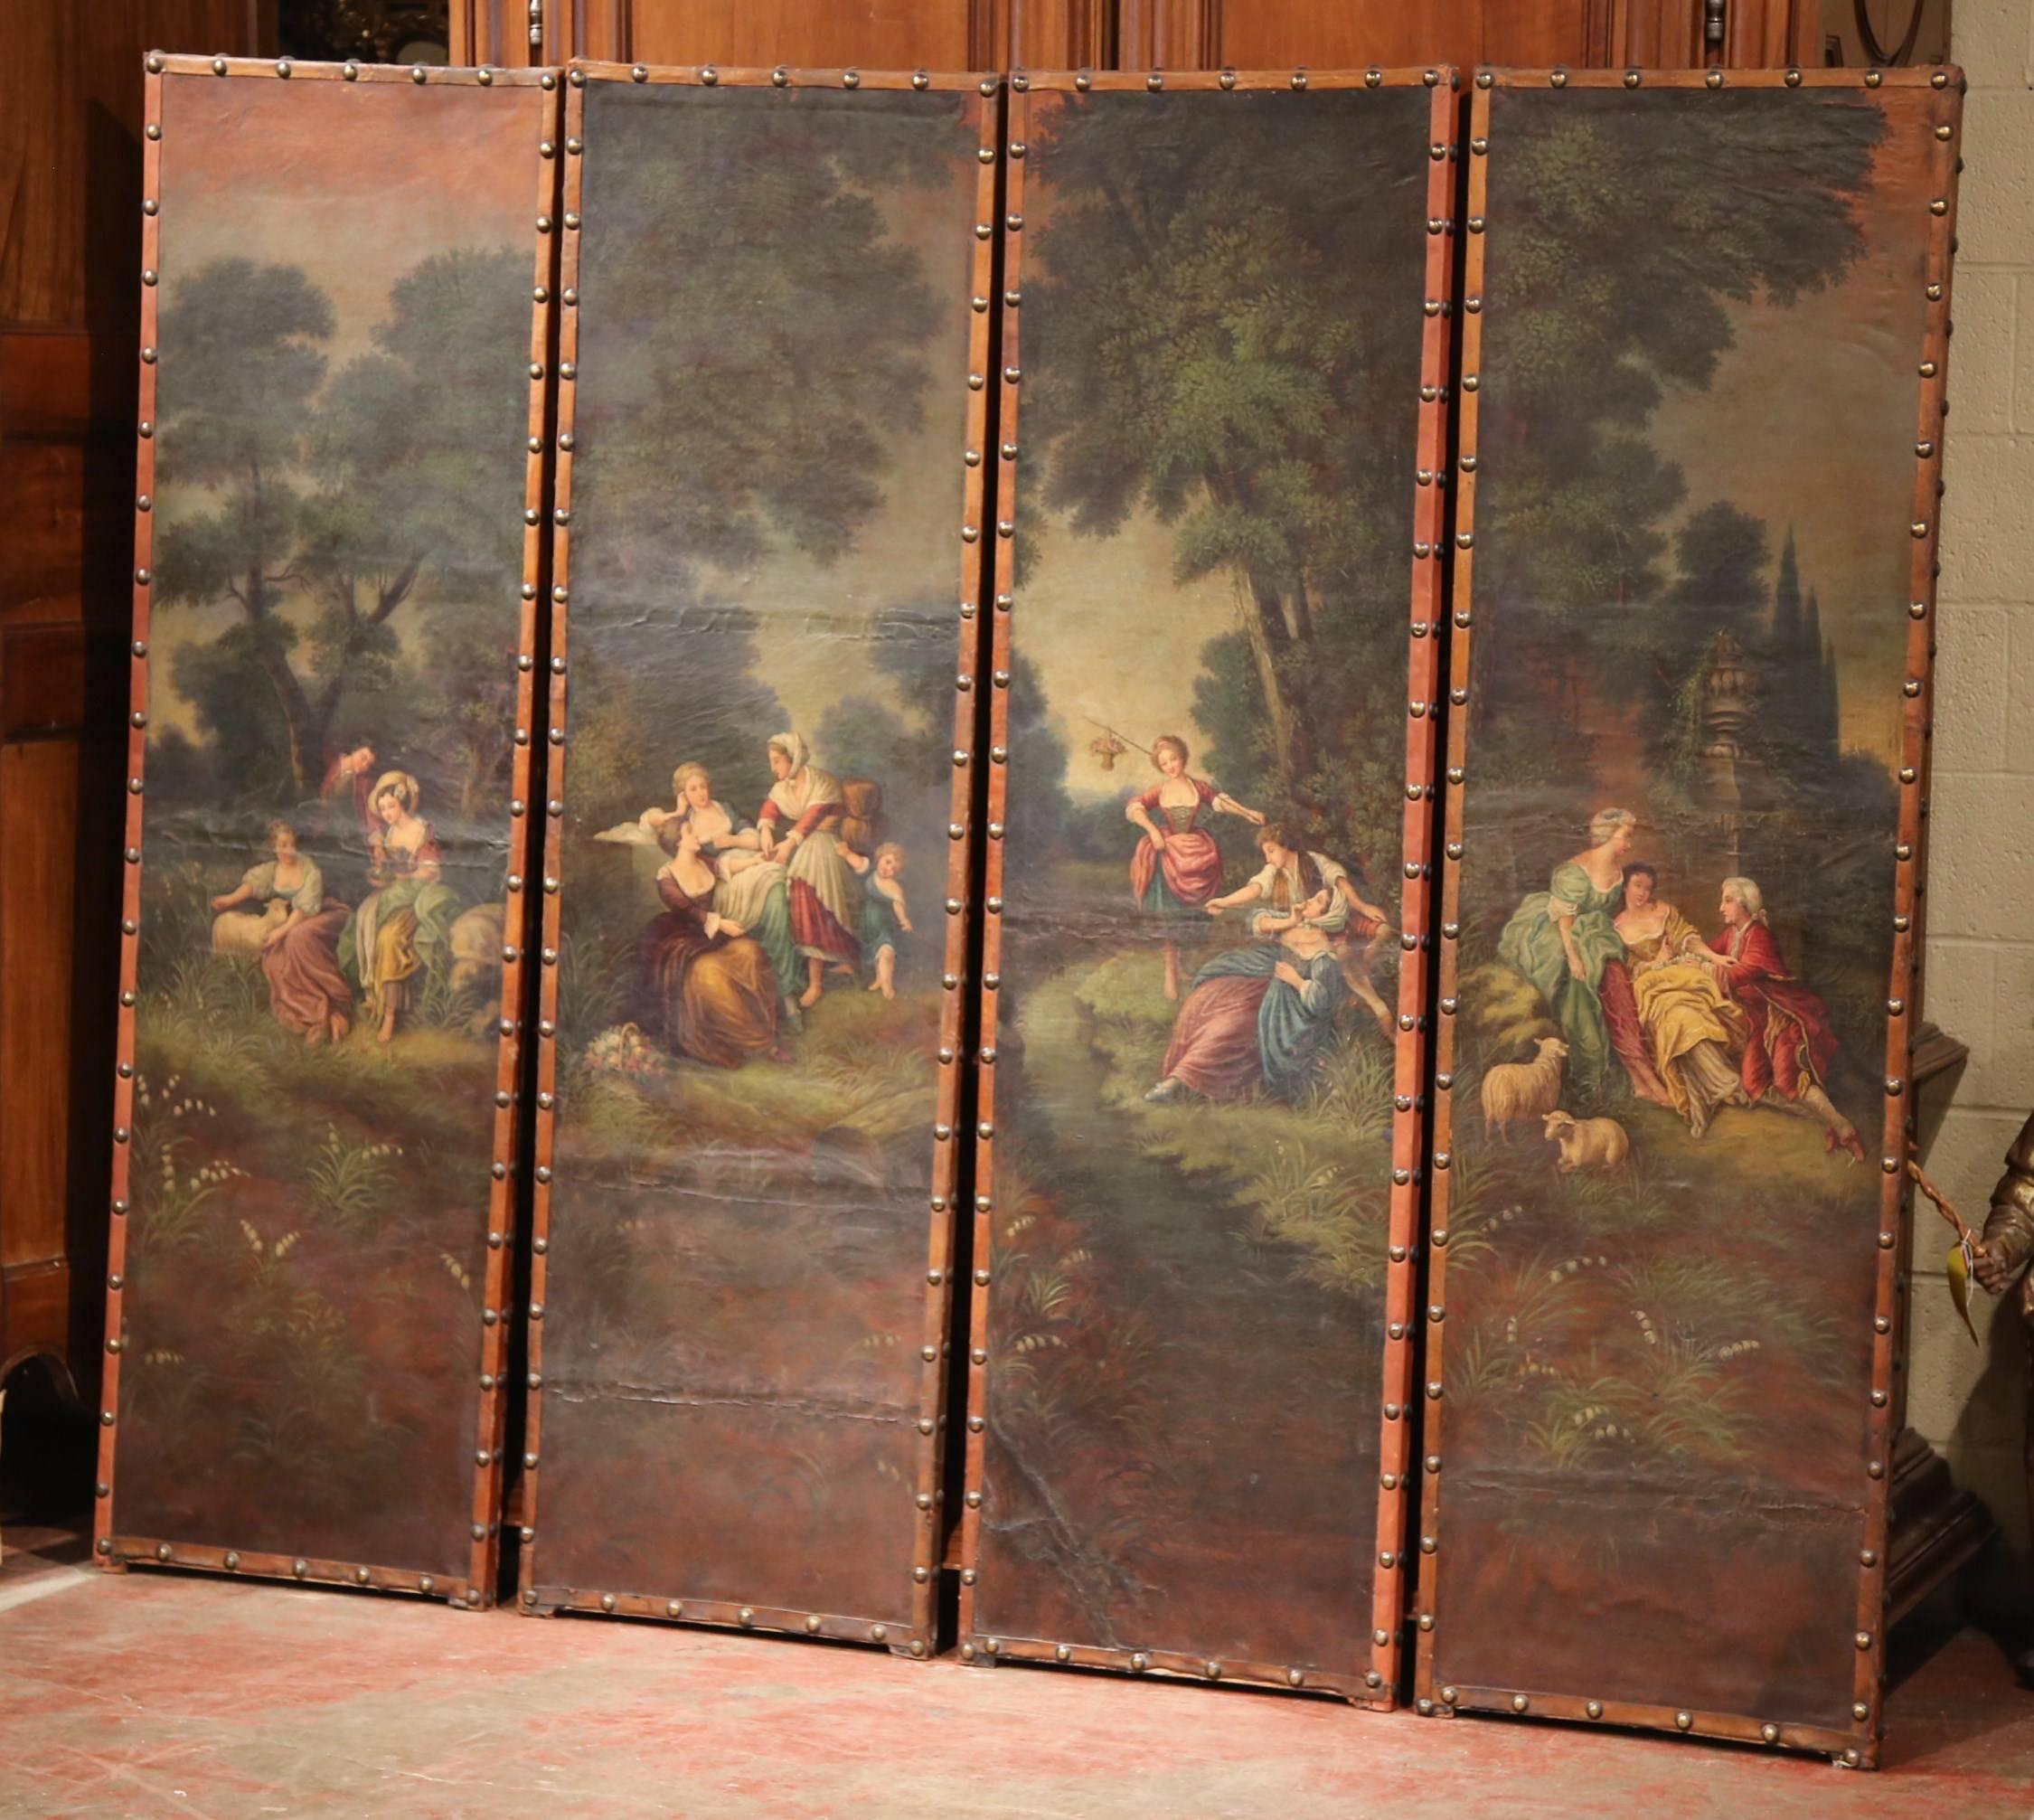 Decorate your living room wall with this delicate, colorful antique leather screen, created in Lyon, France, circa 1760, each of the hand painted panels features pastoral or romantic scenes with people figures in traditional clothing in the manner